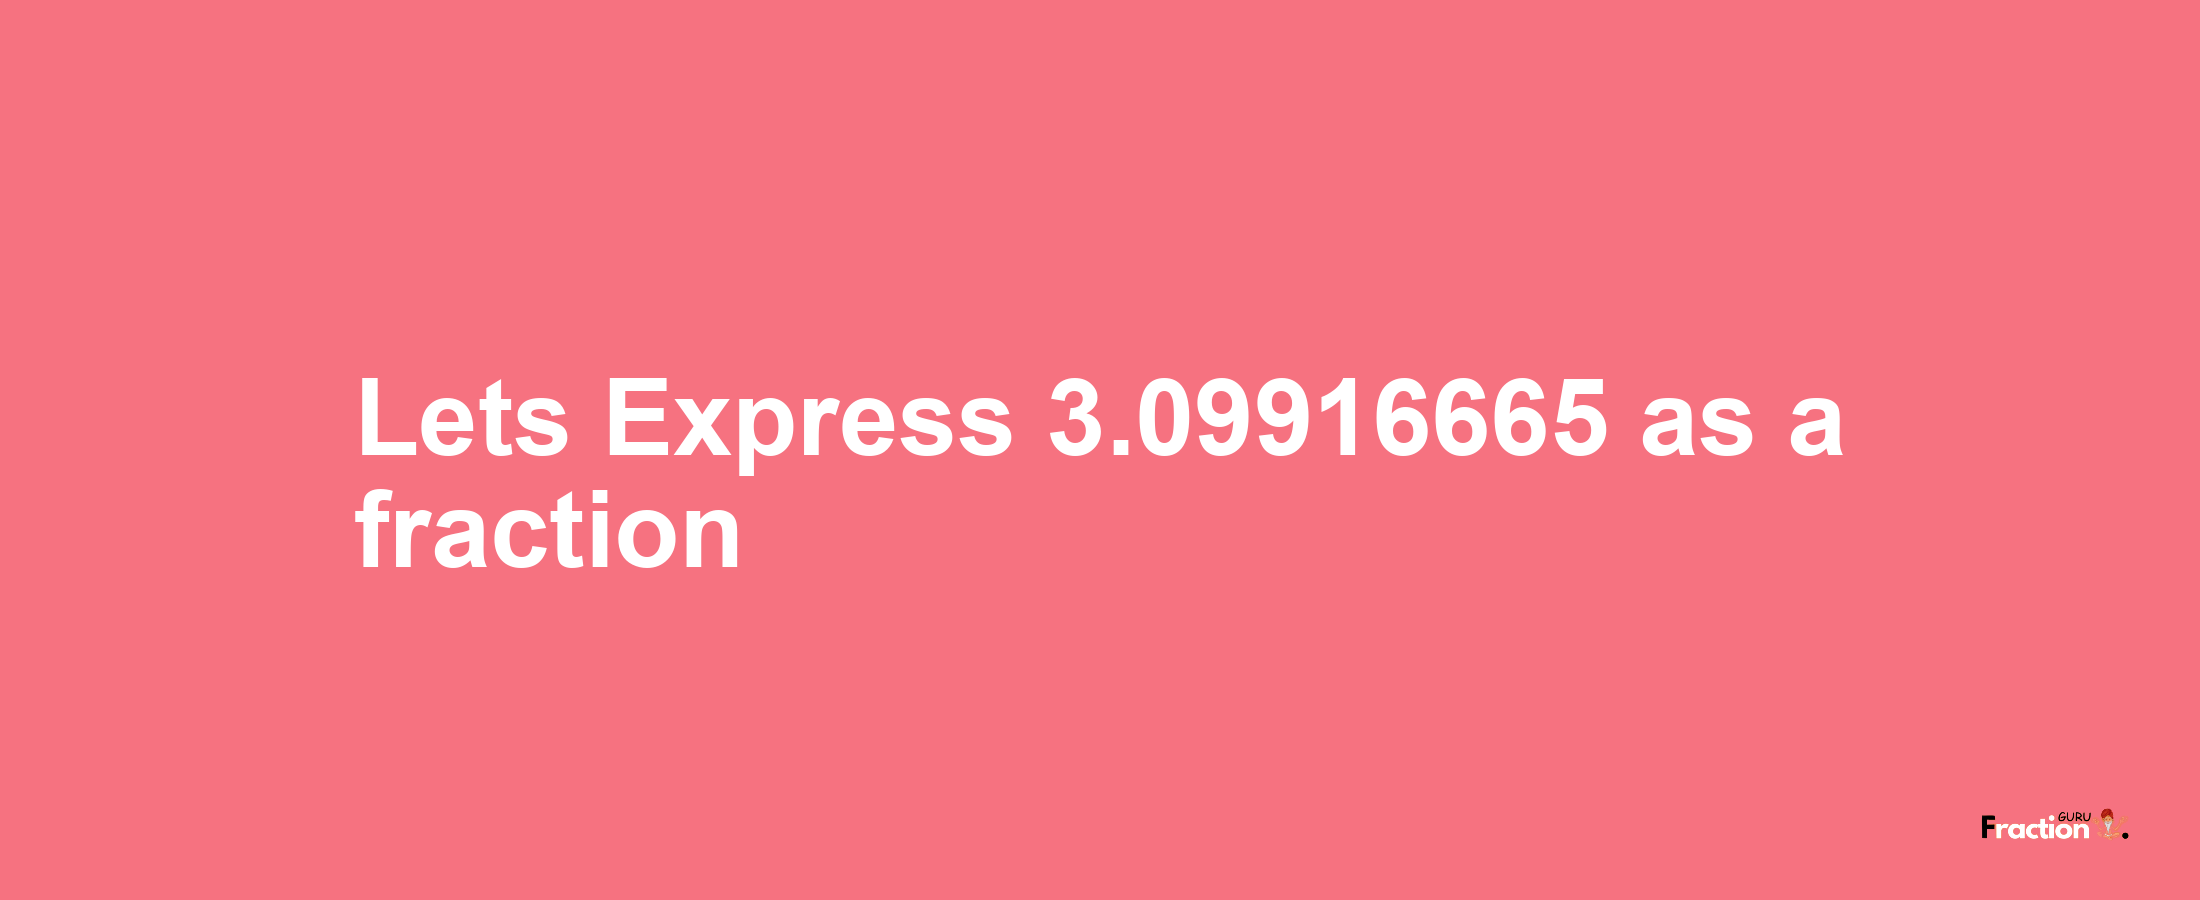 Lets Express 3.09916665 as afraction